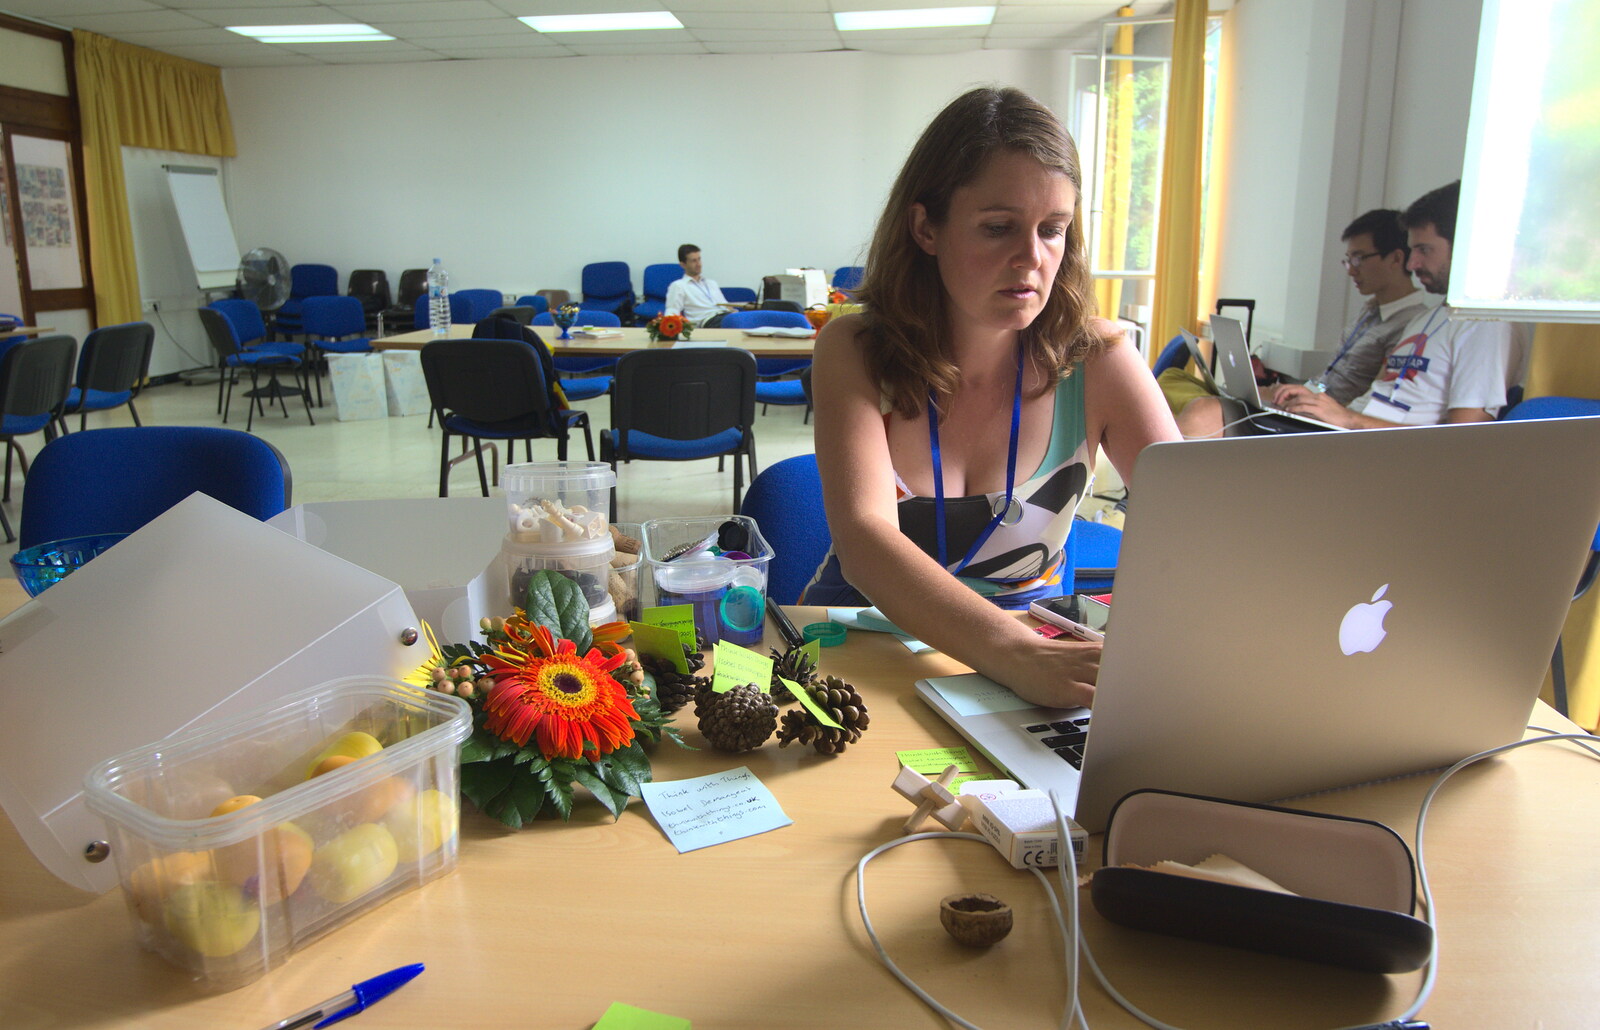 Isobel brushes up her pitch from The Open Education Challenge, Barcelona, Catalonia - 13th July 2014